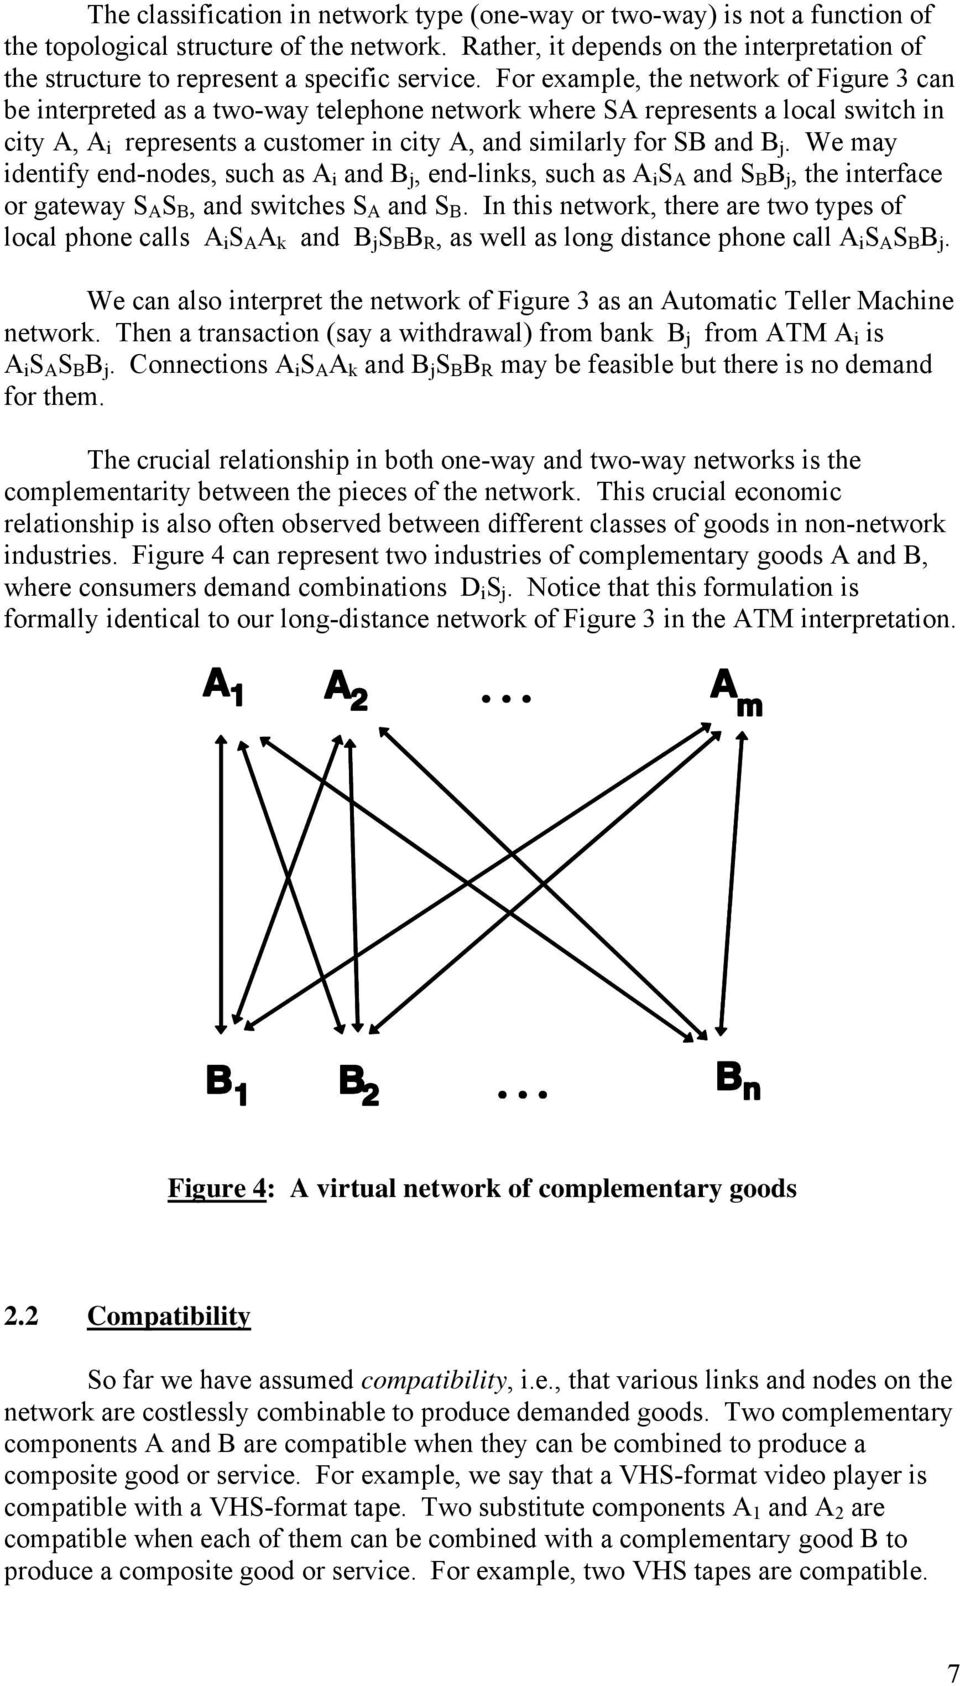 For example, the network of Figure 3 can be interpreted as a two-way telephone network where SA represents a local switch in city A, A i represents a customer in city A, and similarly for SB and B j.